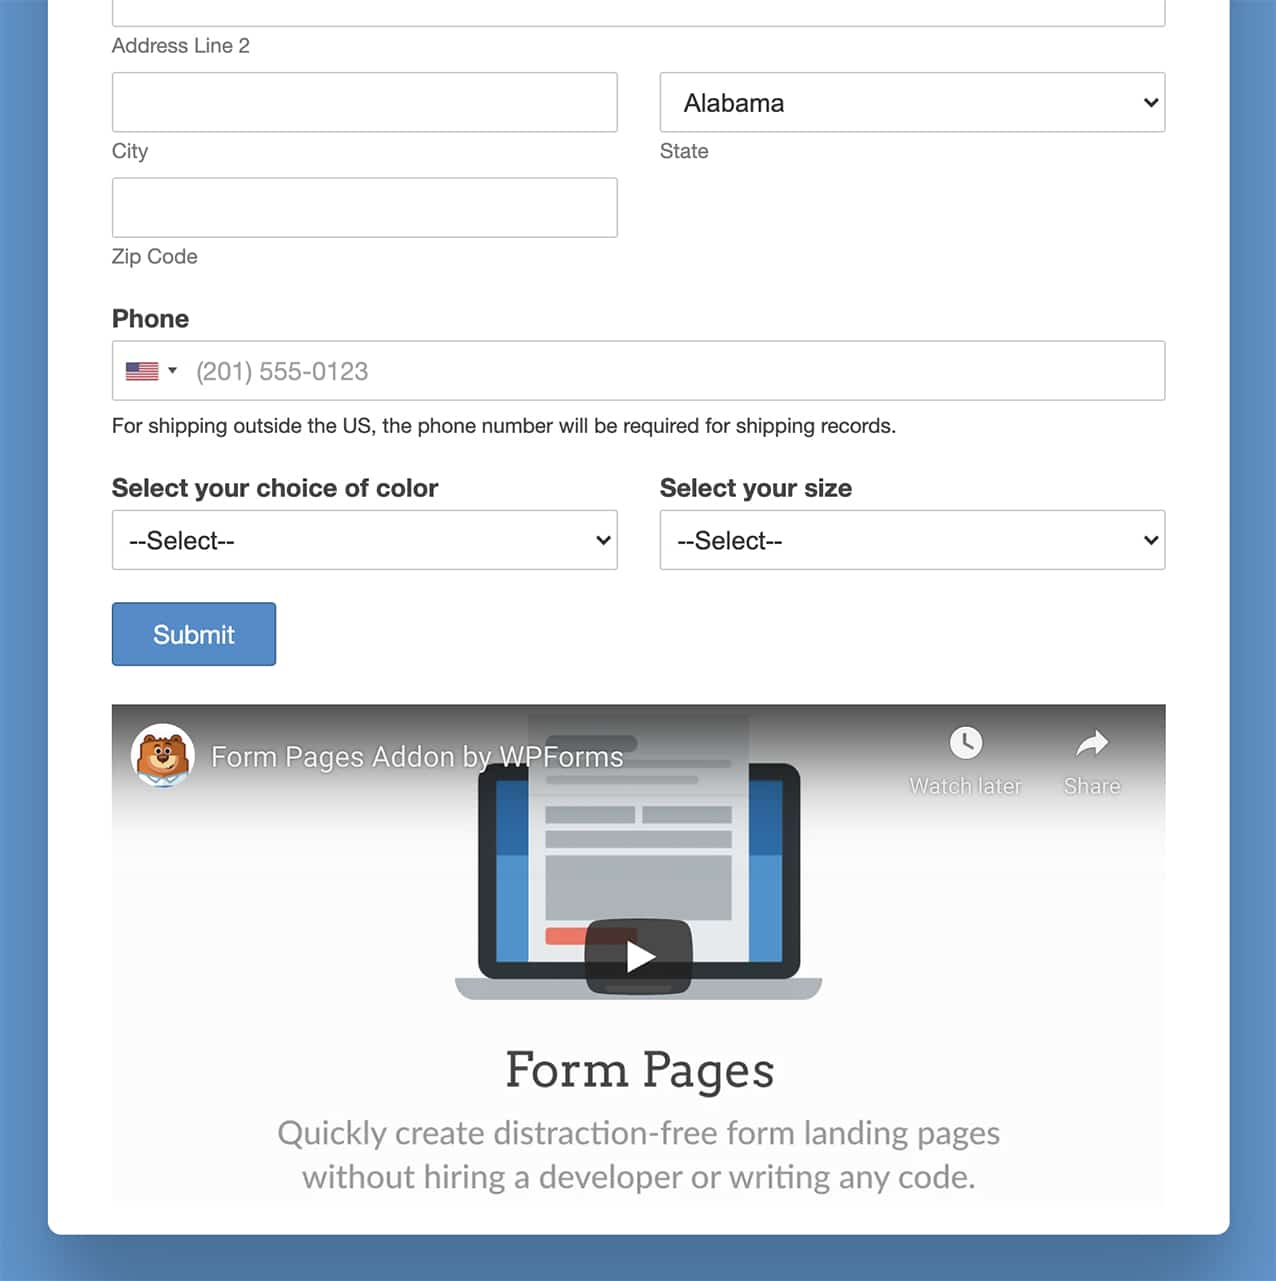 You can display anything after the Form Pages form using the wpforms_form_pages_content_after action